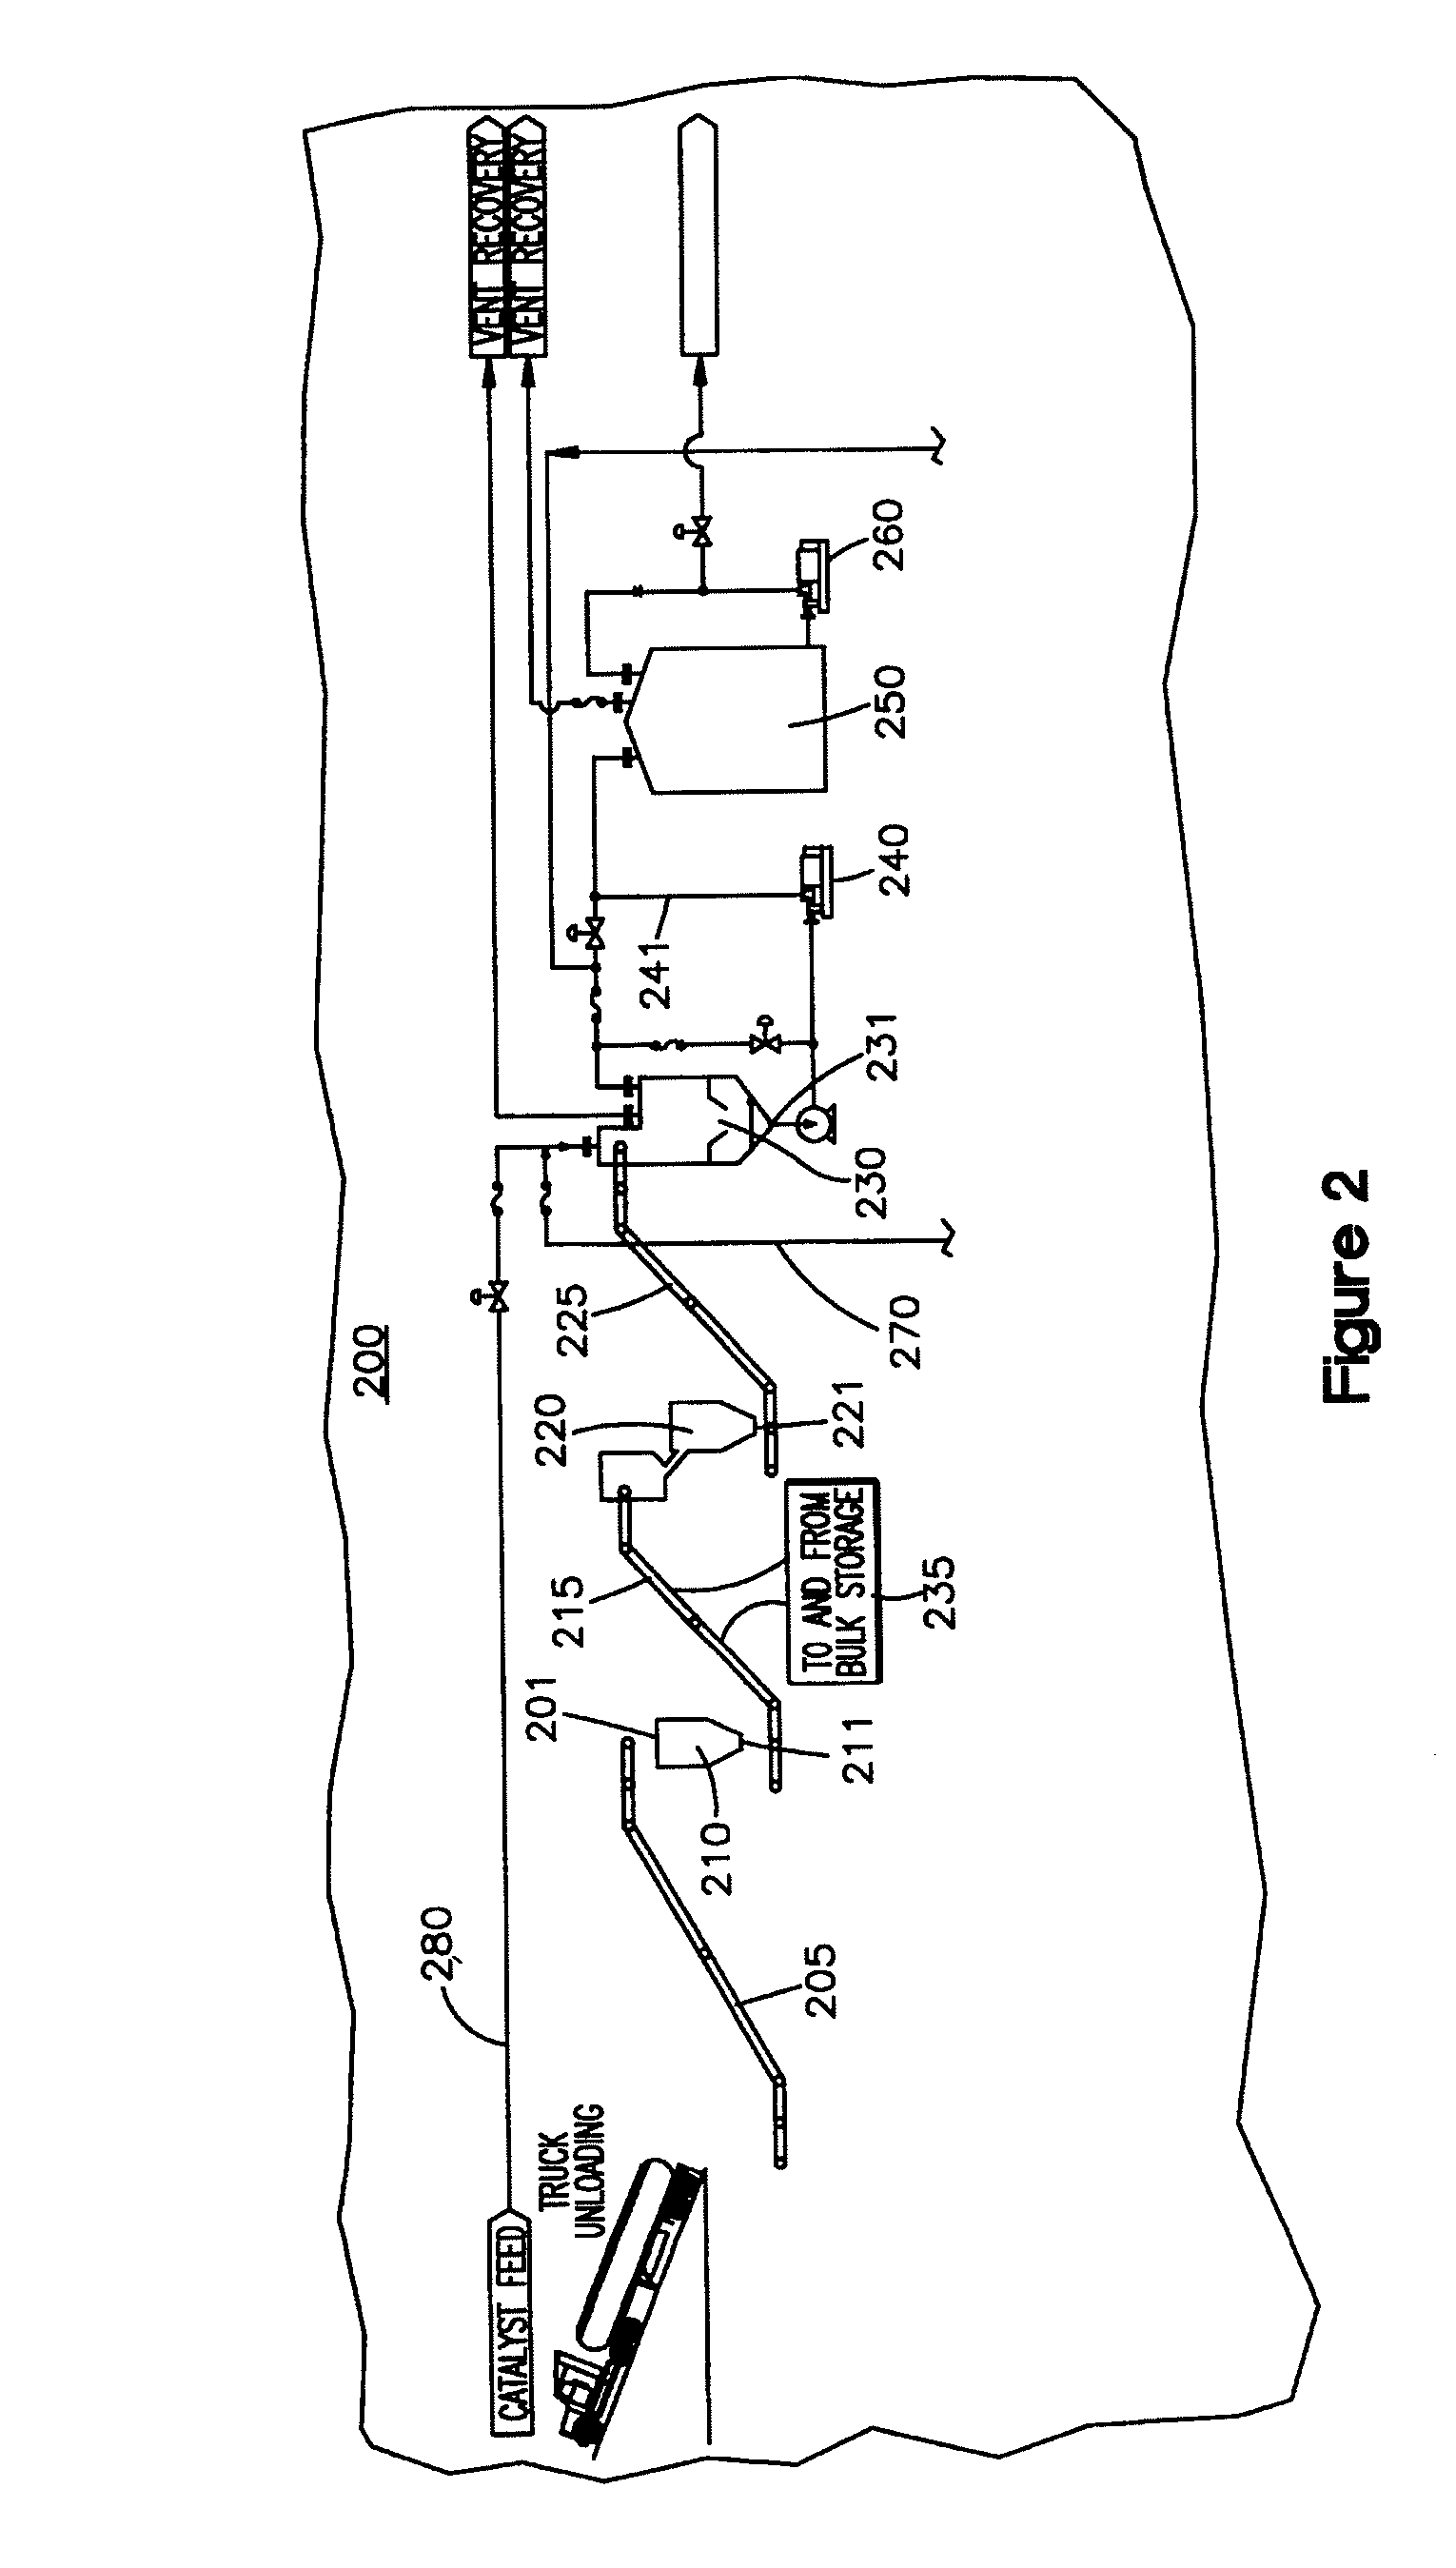 System for the production of synthetic fuels